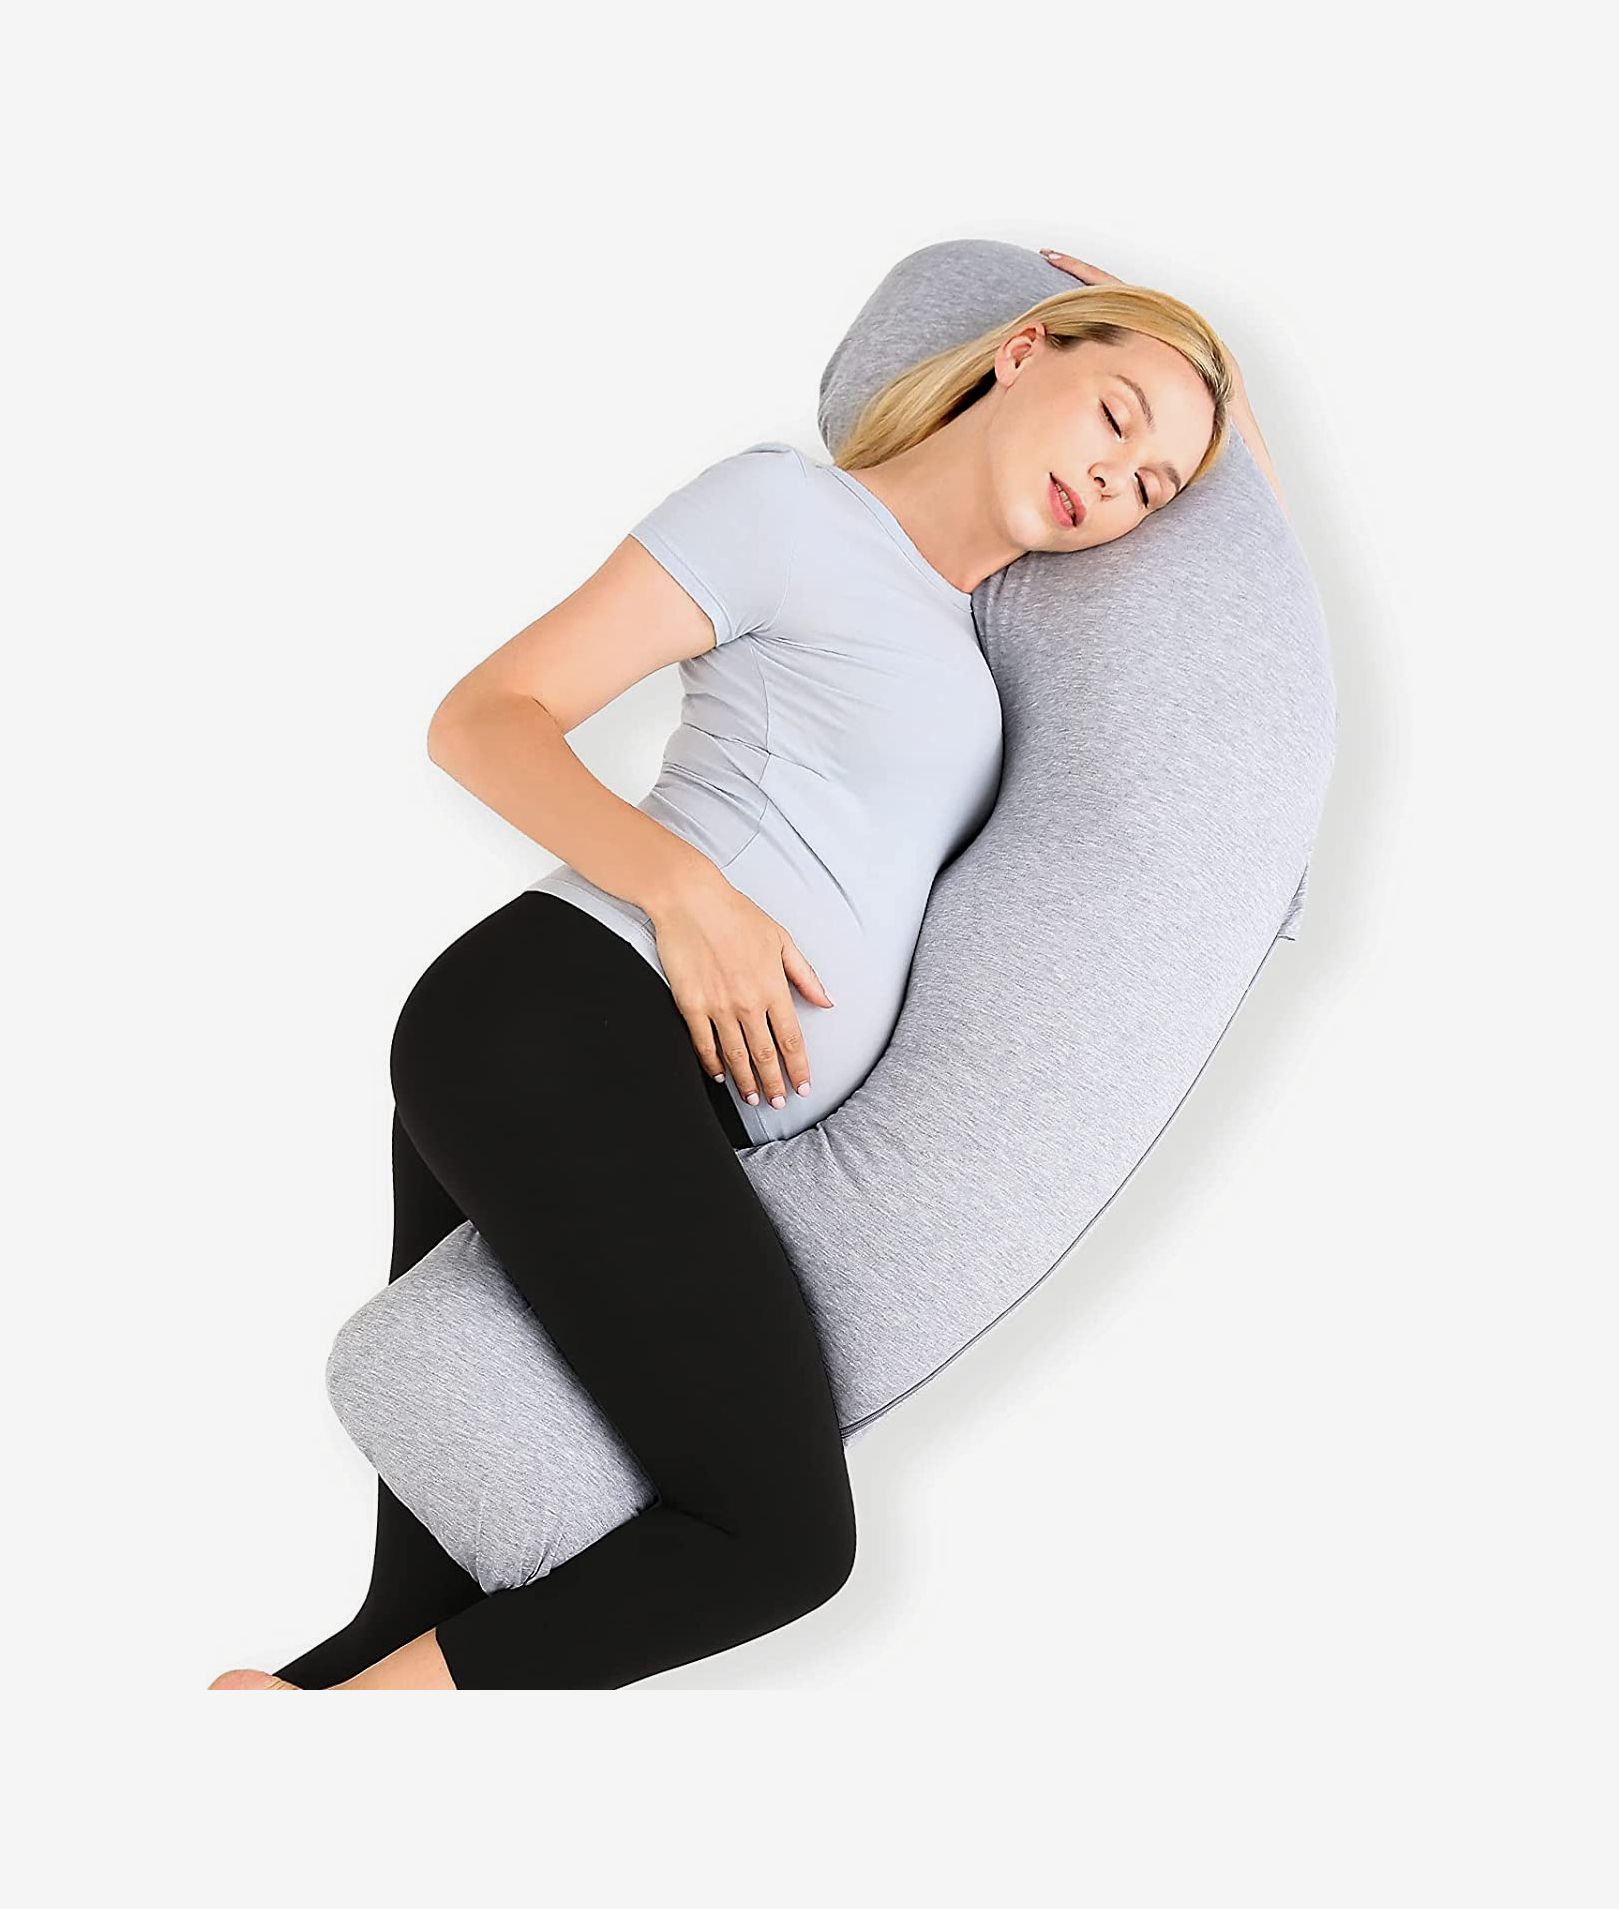 U Shaped Pillow,Best Pregnancy Pillow,Hip Pillow for Sleeping Pain,Pregnancy Pillows for Sleeping,by Your Side Sleeper,Blue 